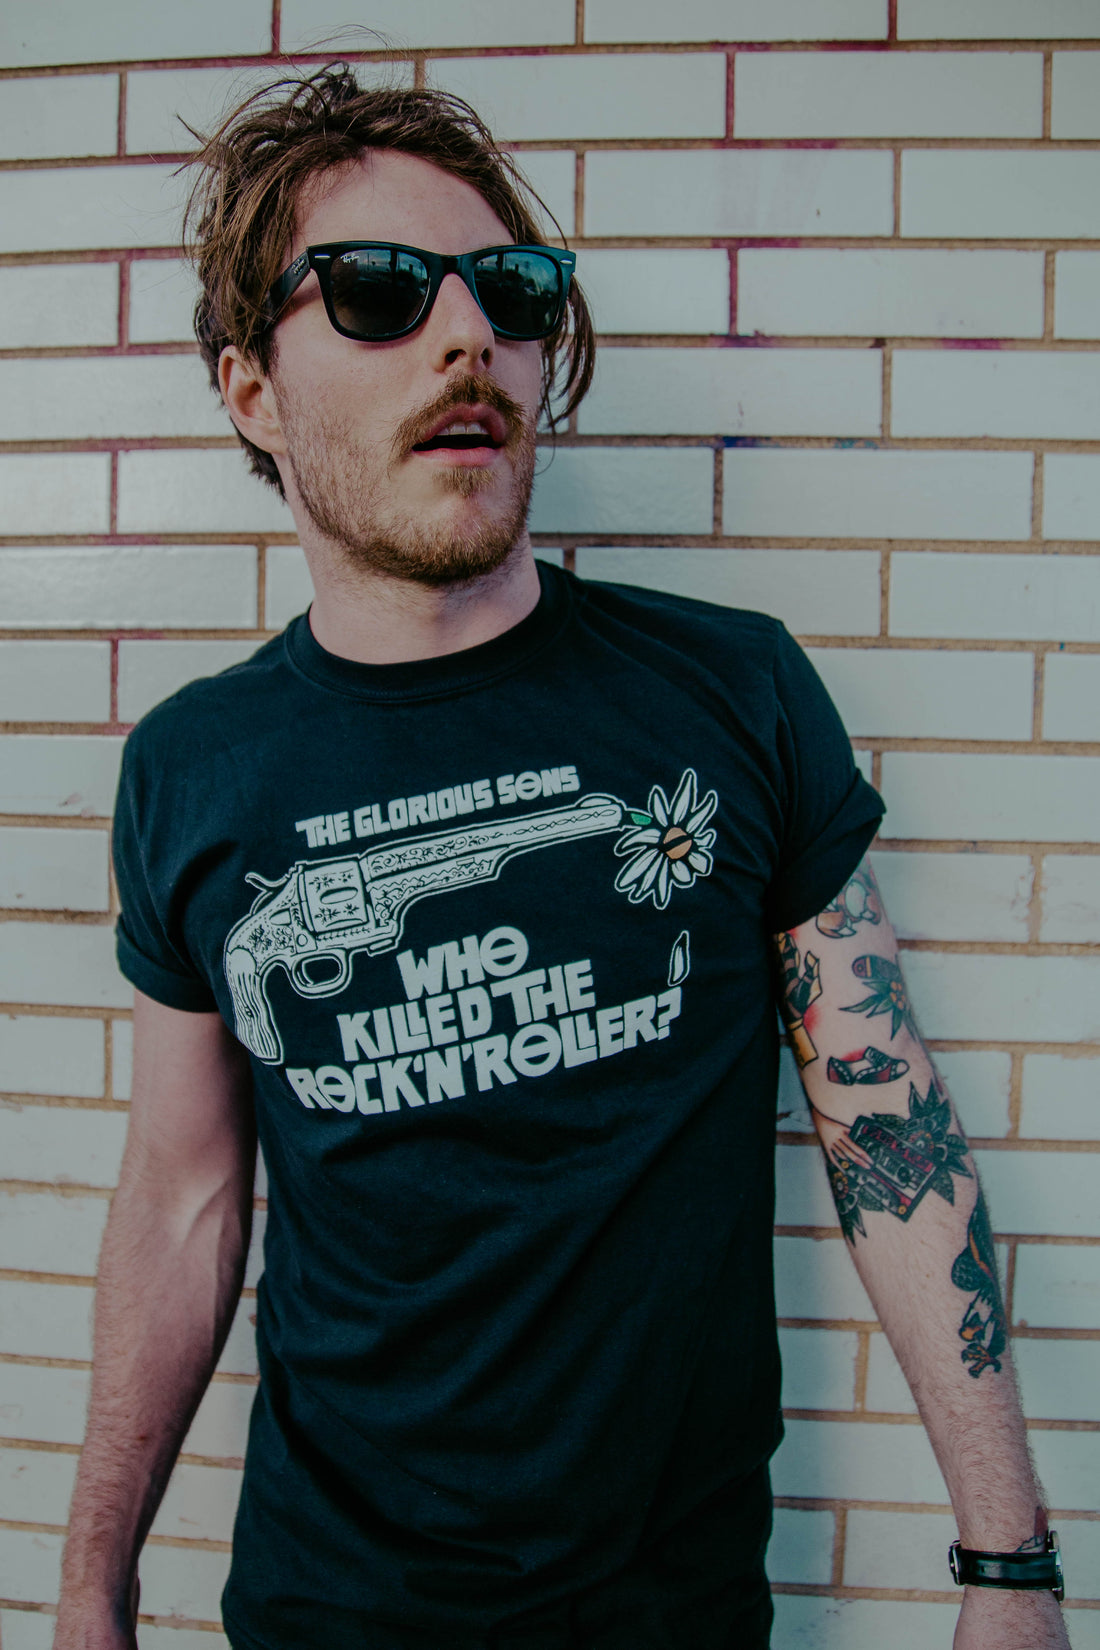 The Glorious Sons - Who Killed The Rock & Roller - Black Tee